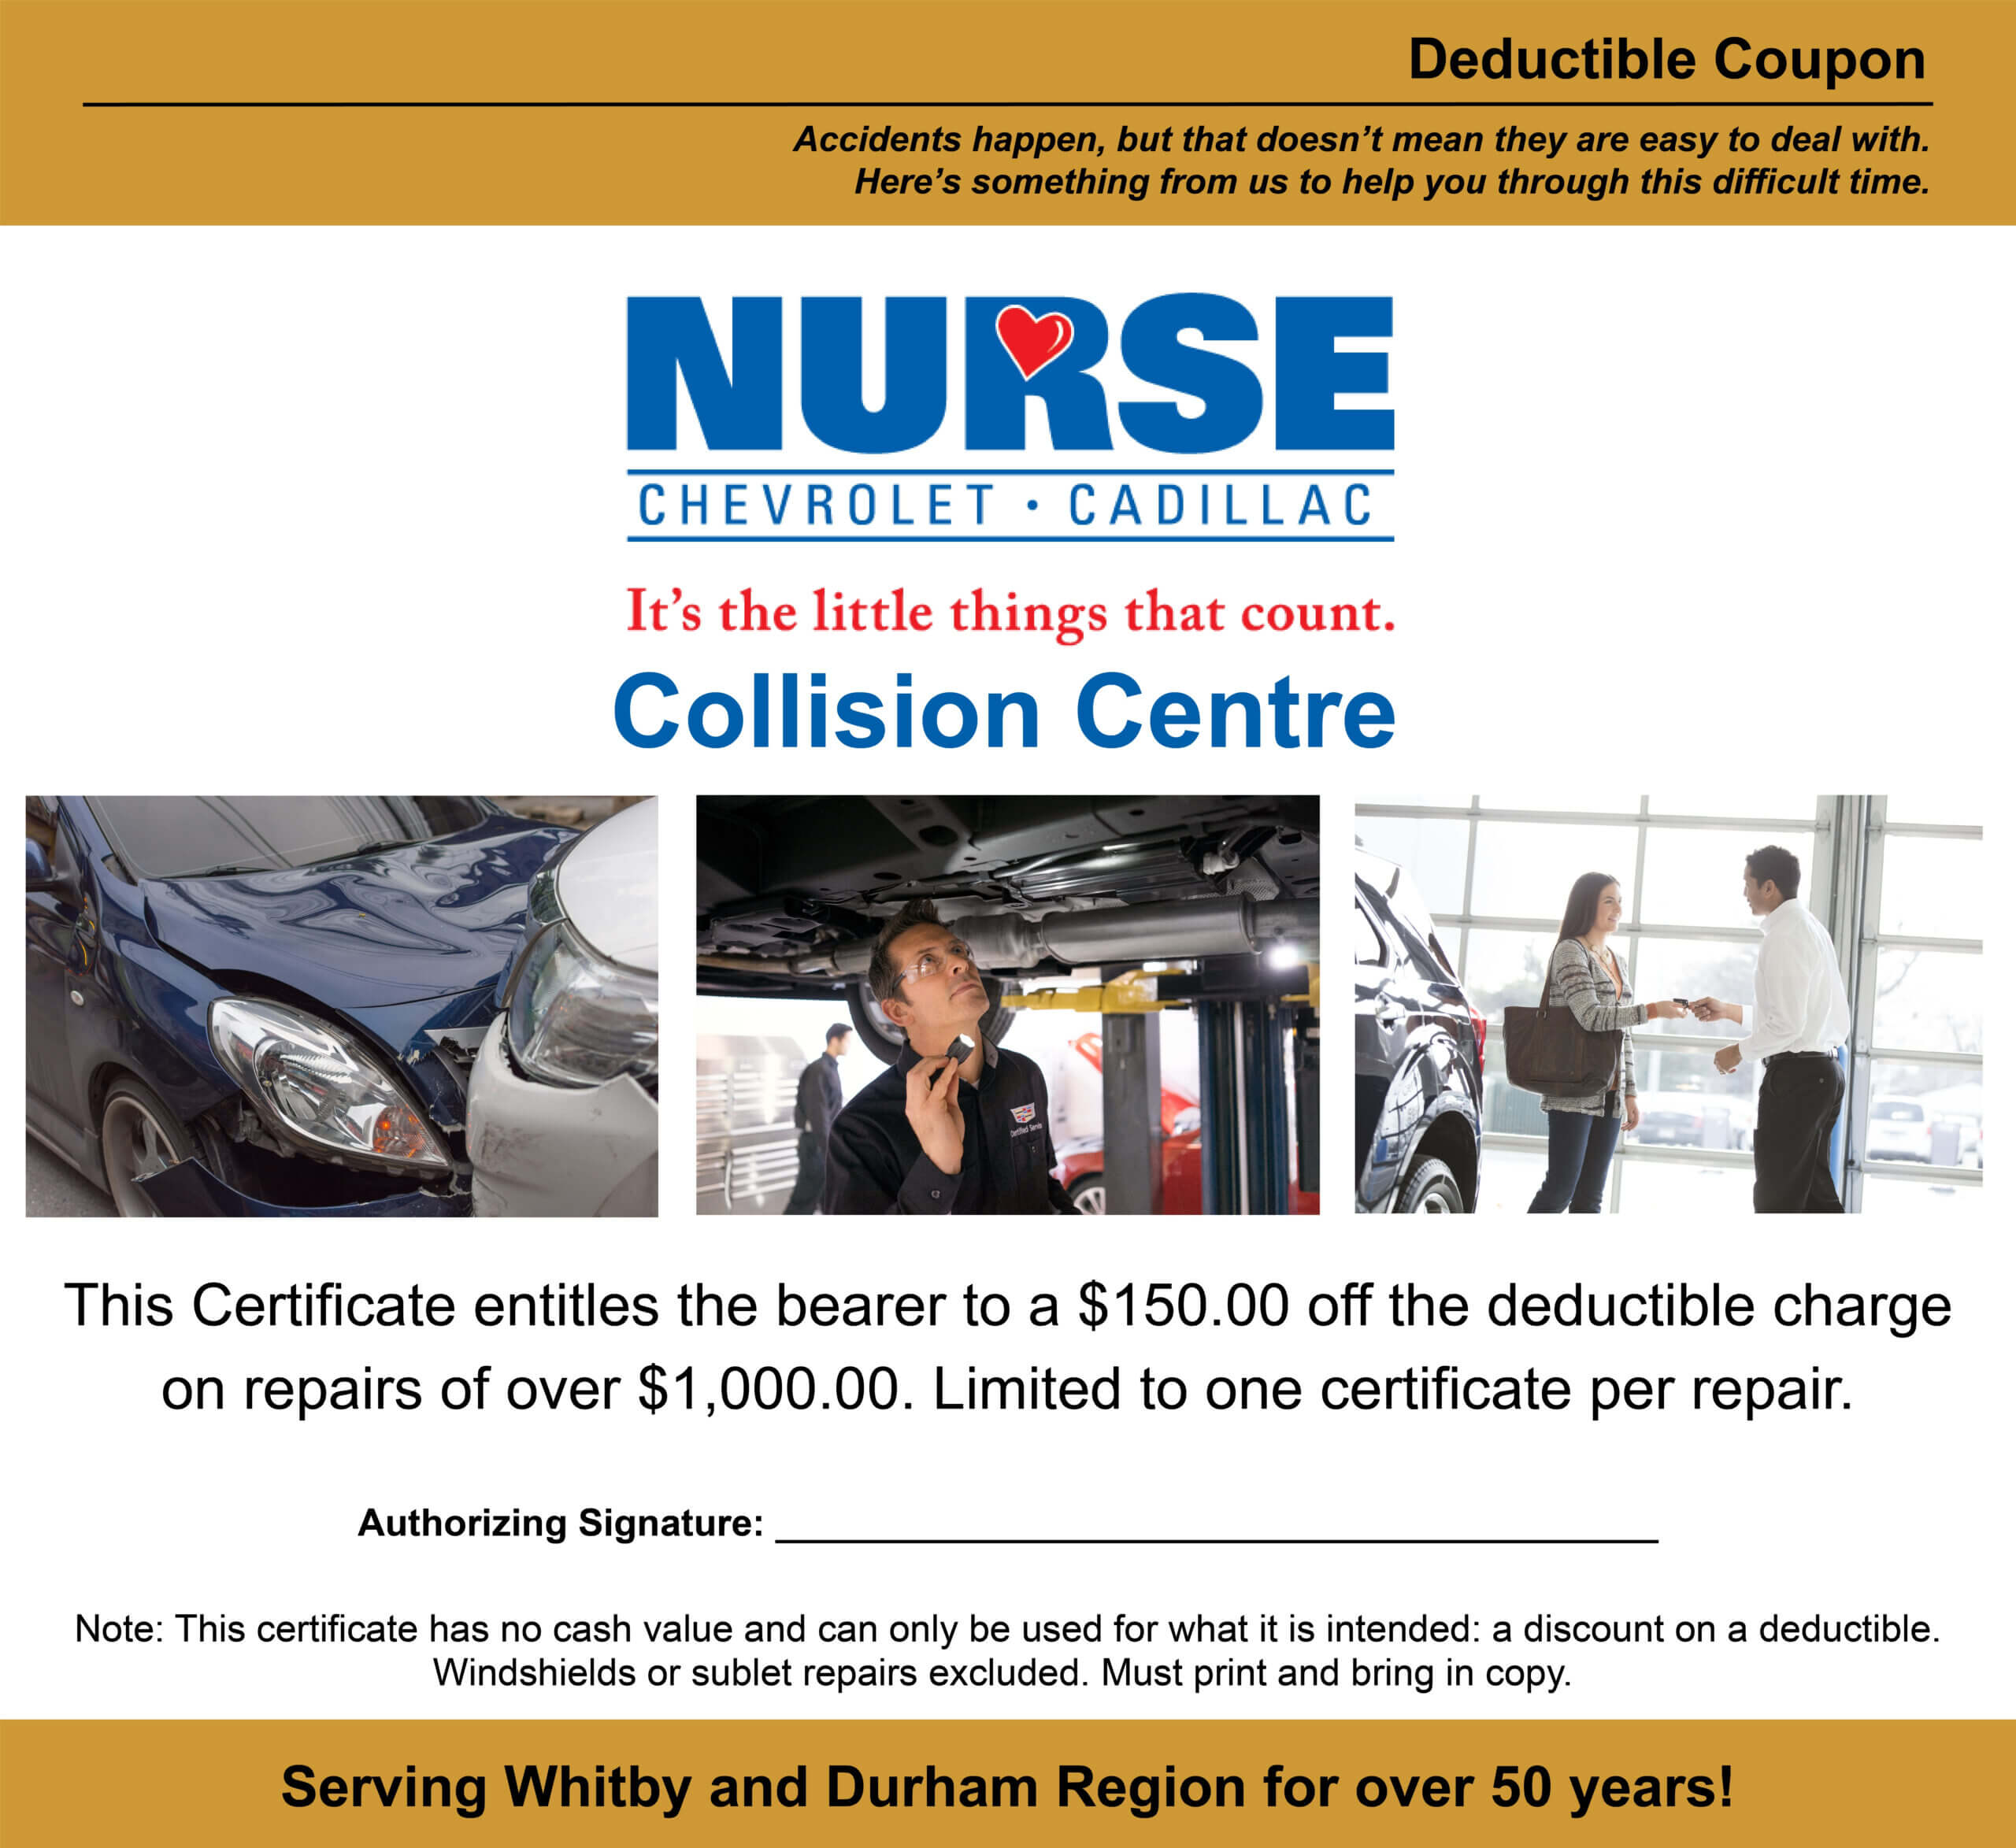 Exclusive Offers | Nurse Chevrolet Cadillac Regarding This Certificate Entitles The Bearer Template